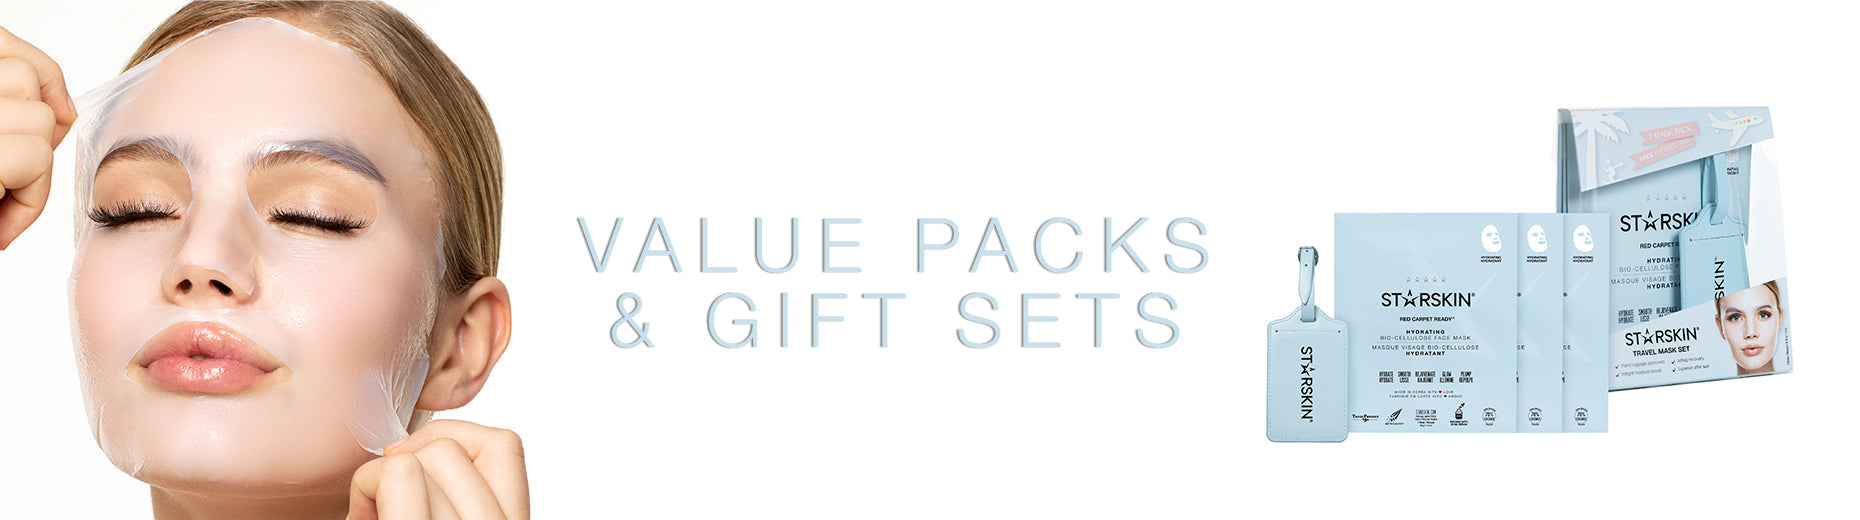 starskin banner value packs and giftsets showing rer carpet ready giftset with free lugage tag